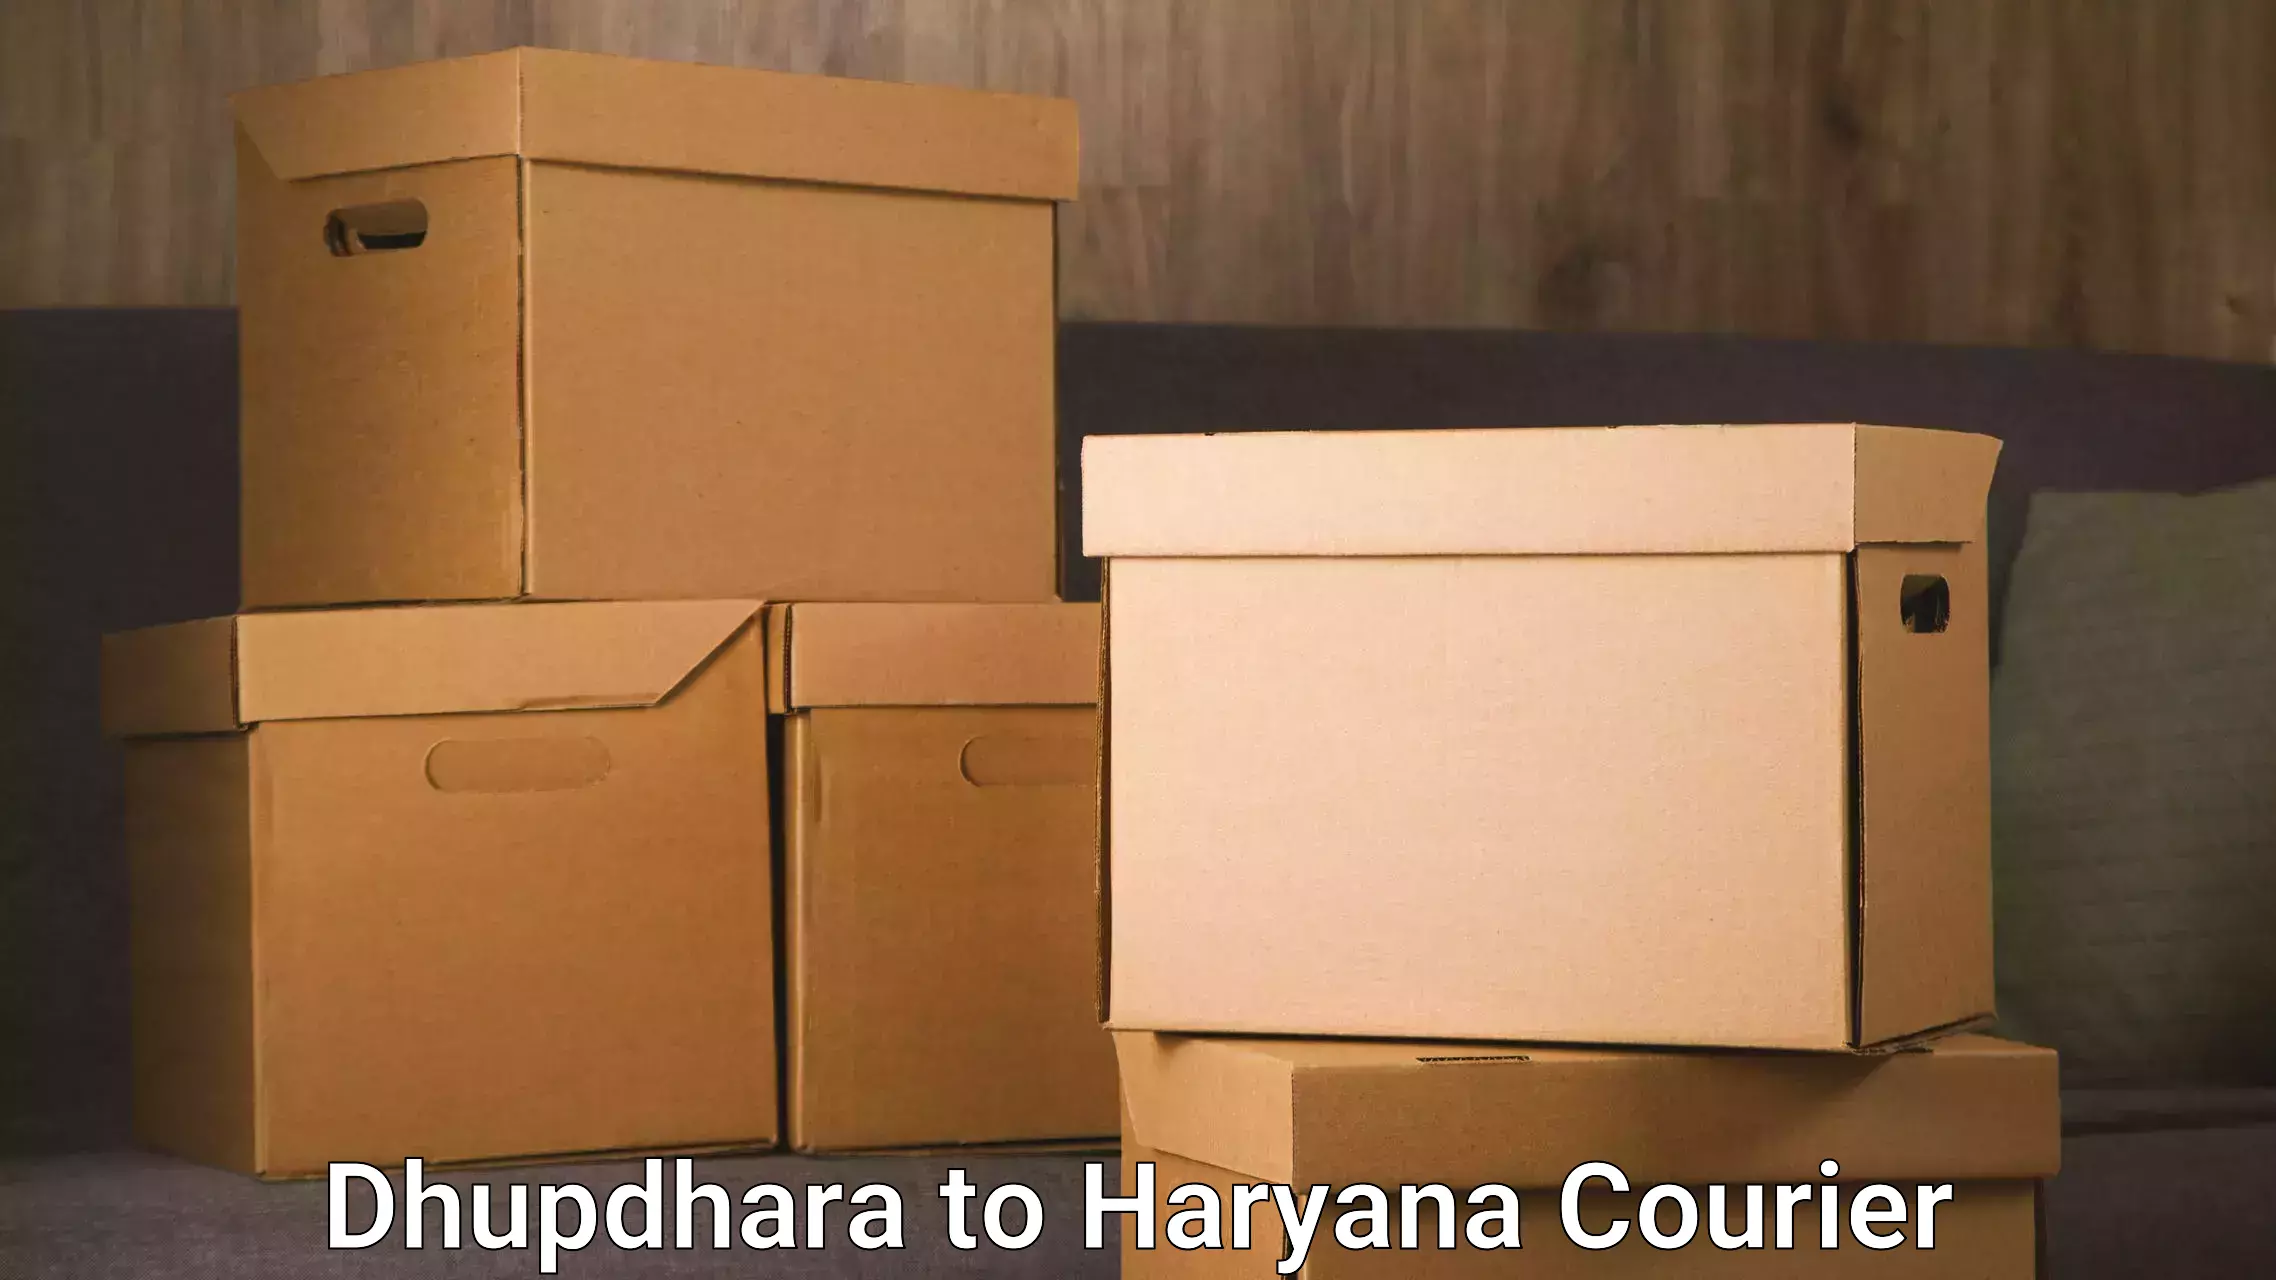 Urgent courier needs in Dhupdhara to Chaudhary Charan Singh Haryana Agricultural University Hisar